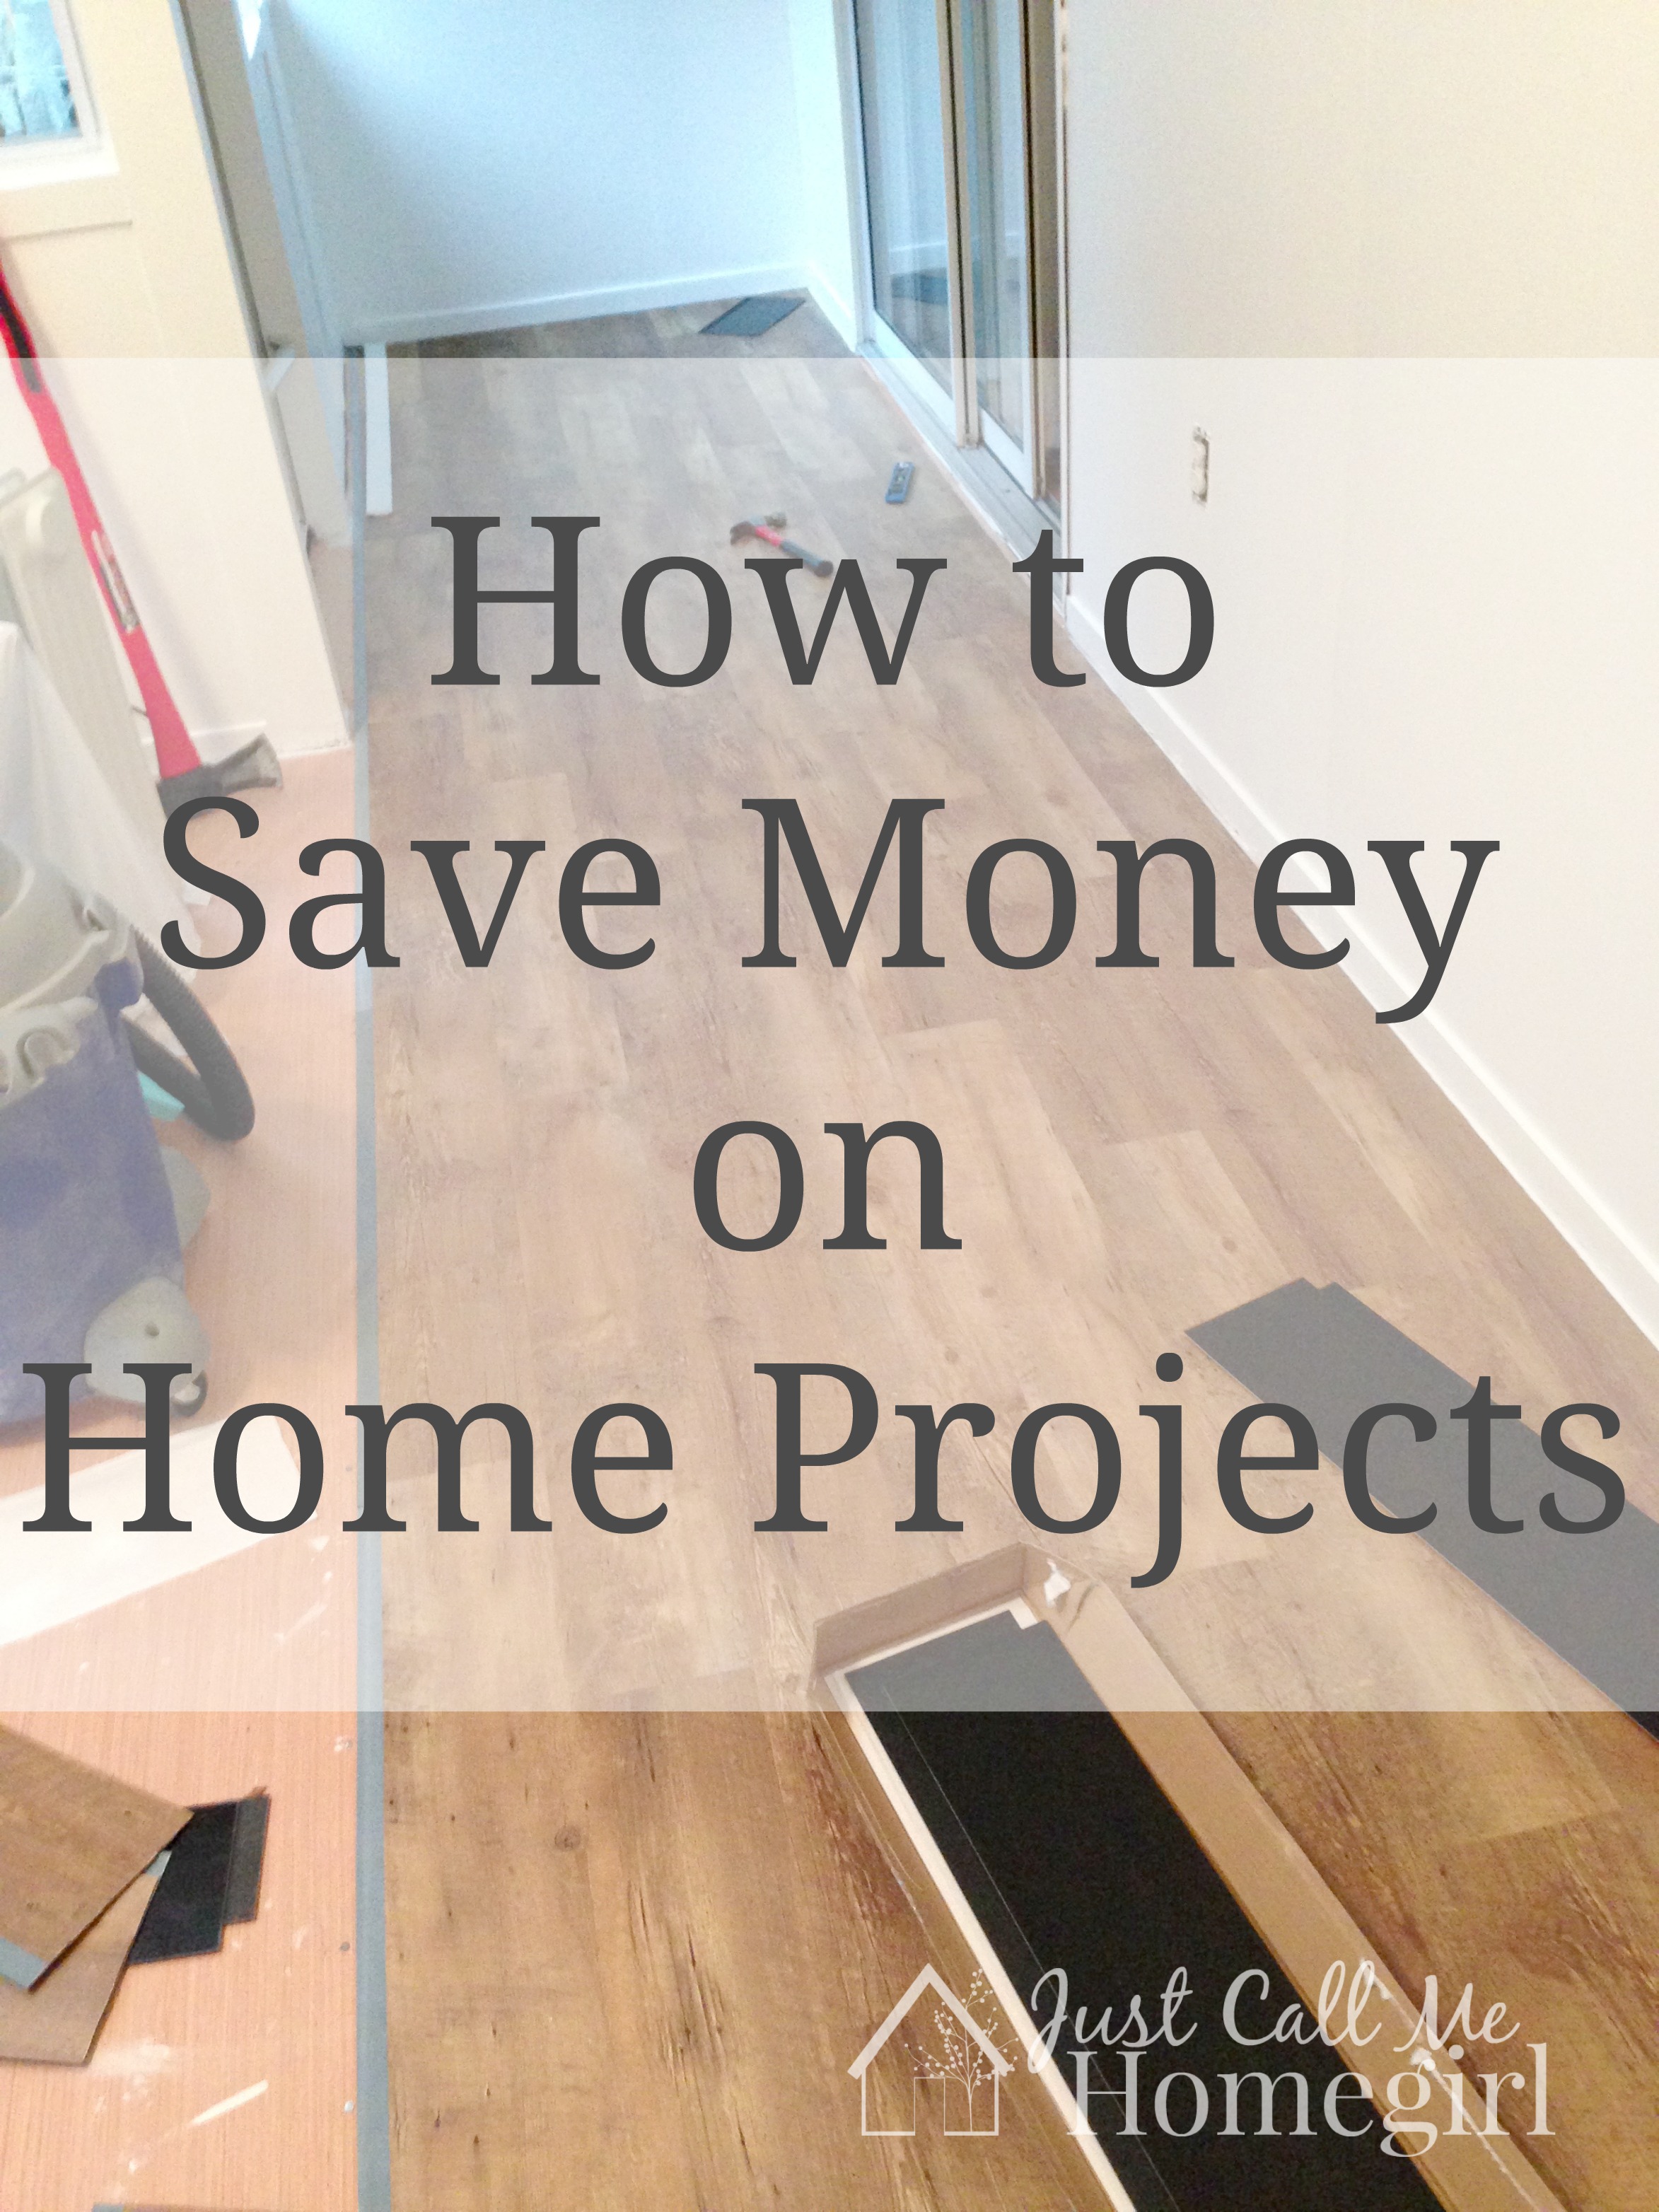 How to Save Money On Home Projects - Just Call Me Homegirl